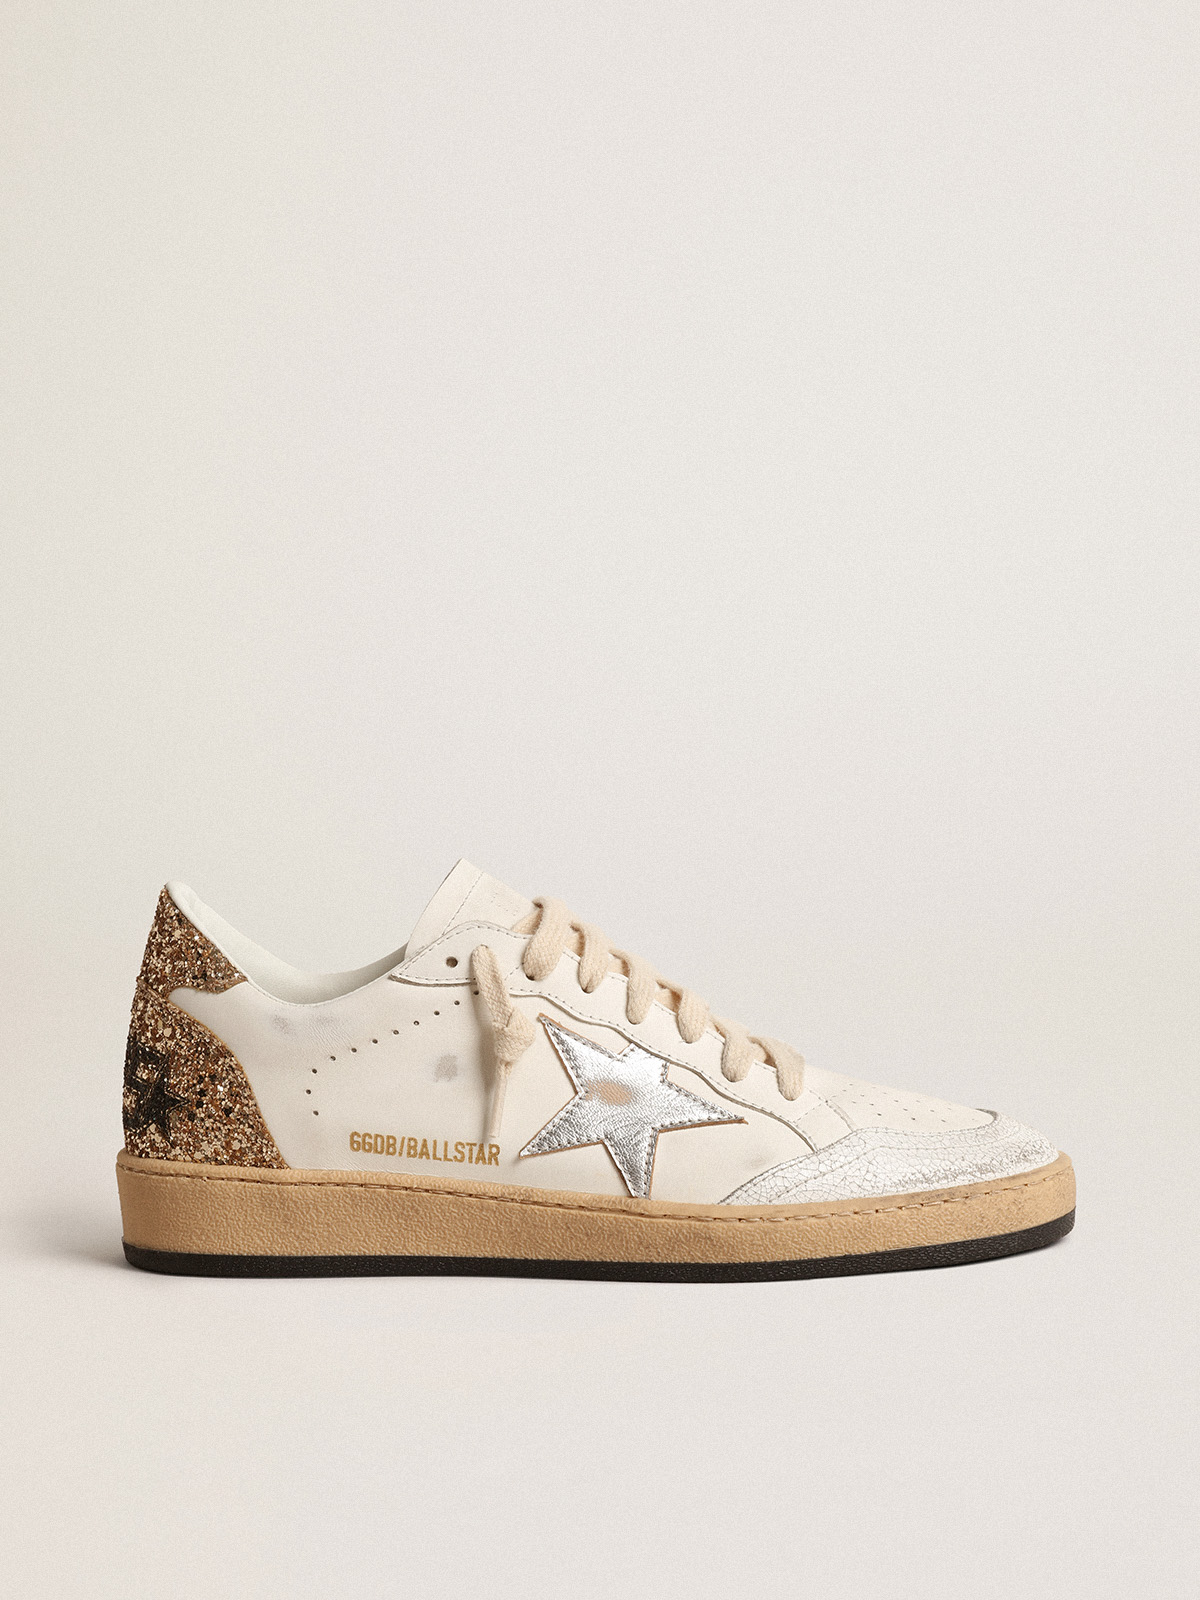 Ball Star with metallic leather star and glitter heel tab | Golden Goose